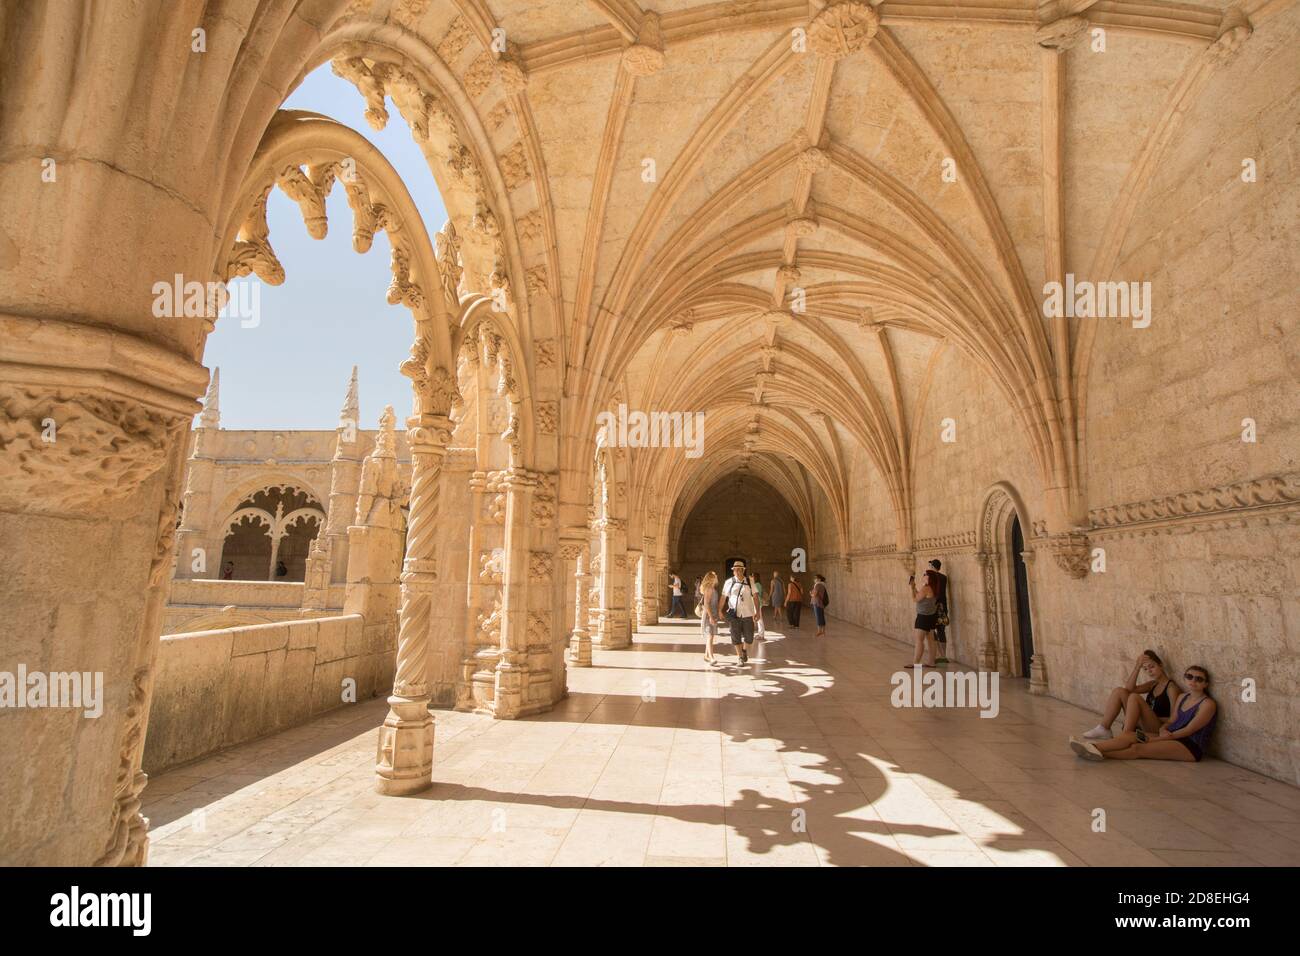 Interior cloister of Jerónimos Monastery in Lisbon, Portugal, Europe. Stock Photo